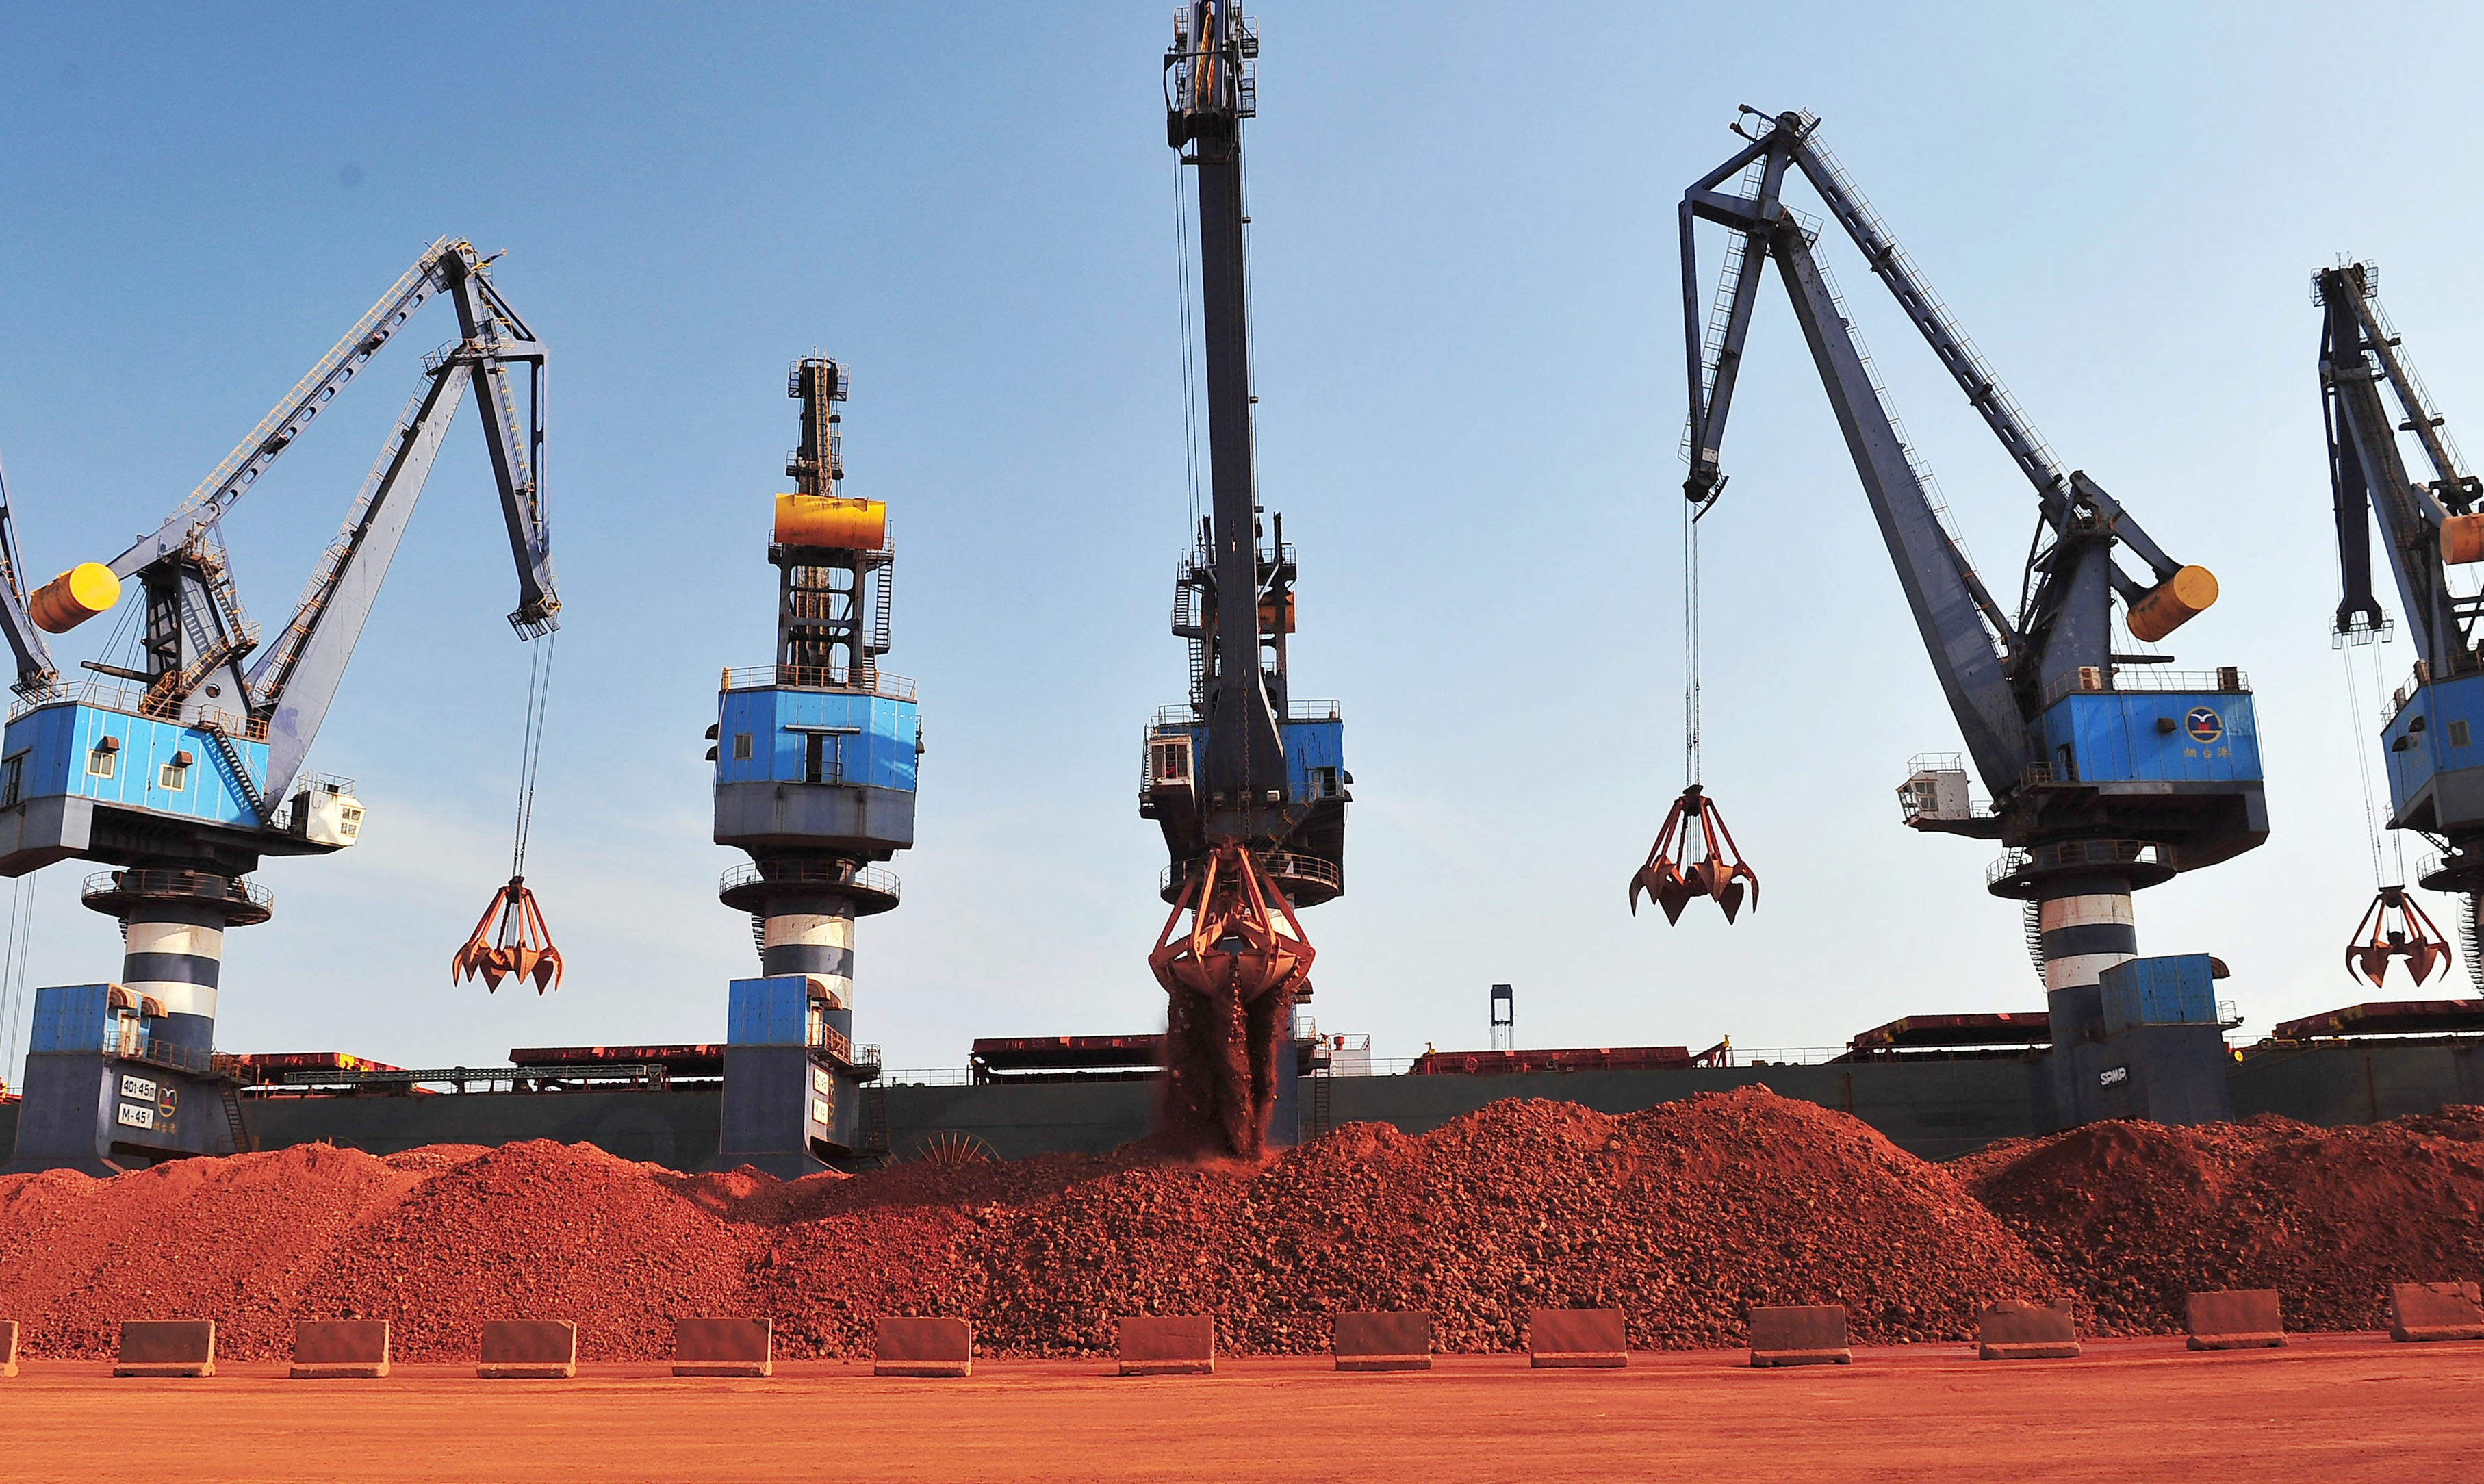 Ship carrying bauxite from Guinea is unloaded at a port in Yantai